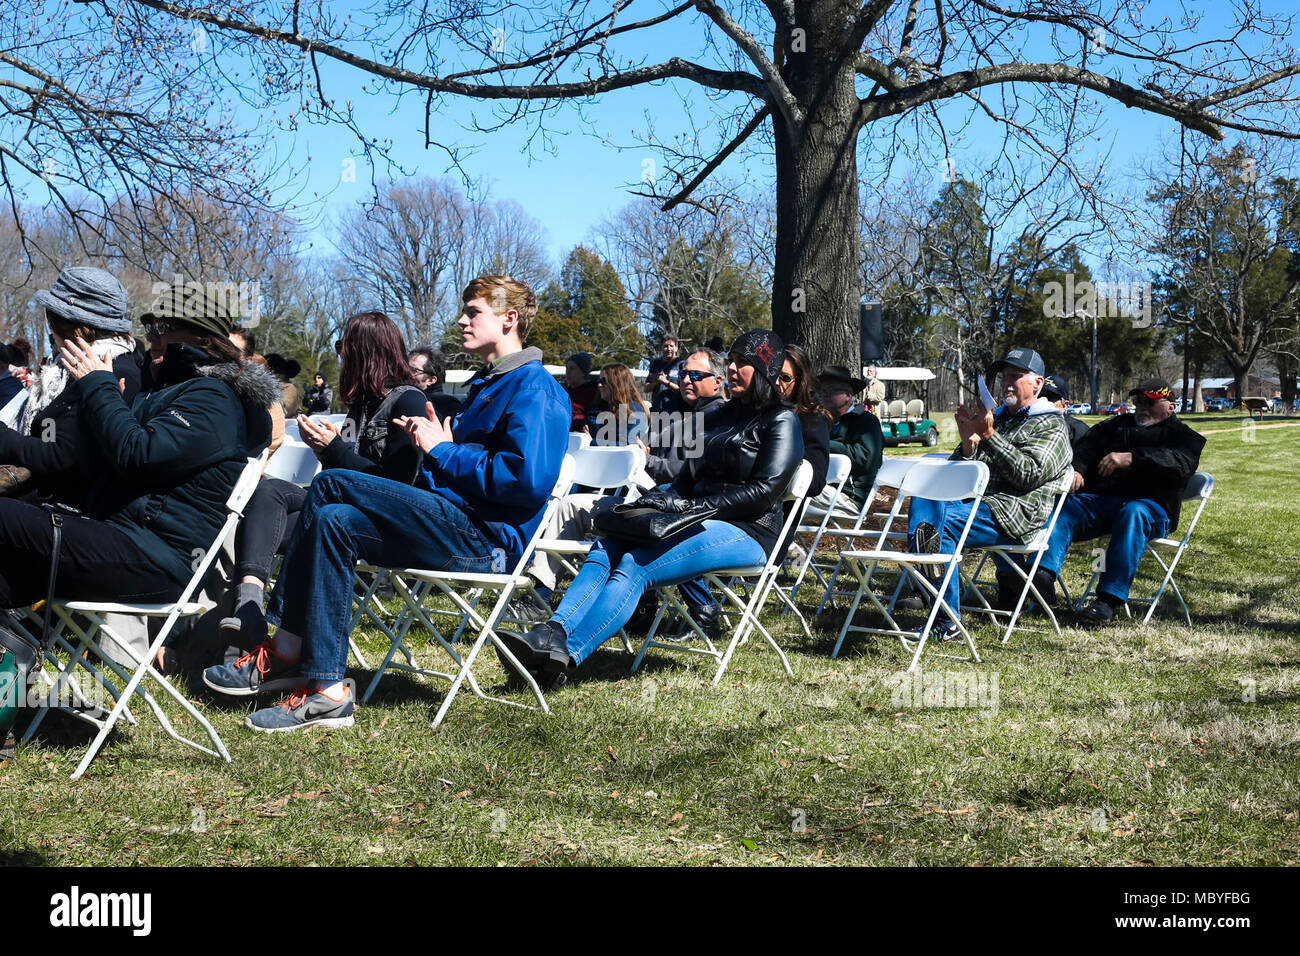 Guests attend the Presidential wreath laying ceremony honoring the 4th President of the United States, James Madison, also known as the Father of the Constitution, at his home at Montpelier, Orange, Va., March 16, 2018. This event was held in commemoration of the 267th anniversary of the birth of Madison, born in 1751, and has also been decreed as James Madison Appreciation Day for the Commonwealth of Virginia. Stock Photo